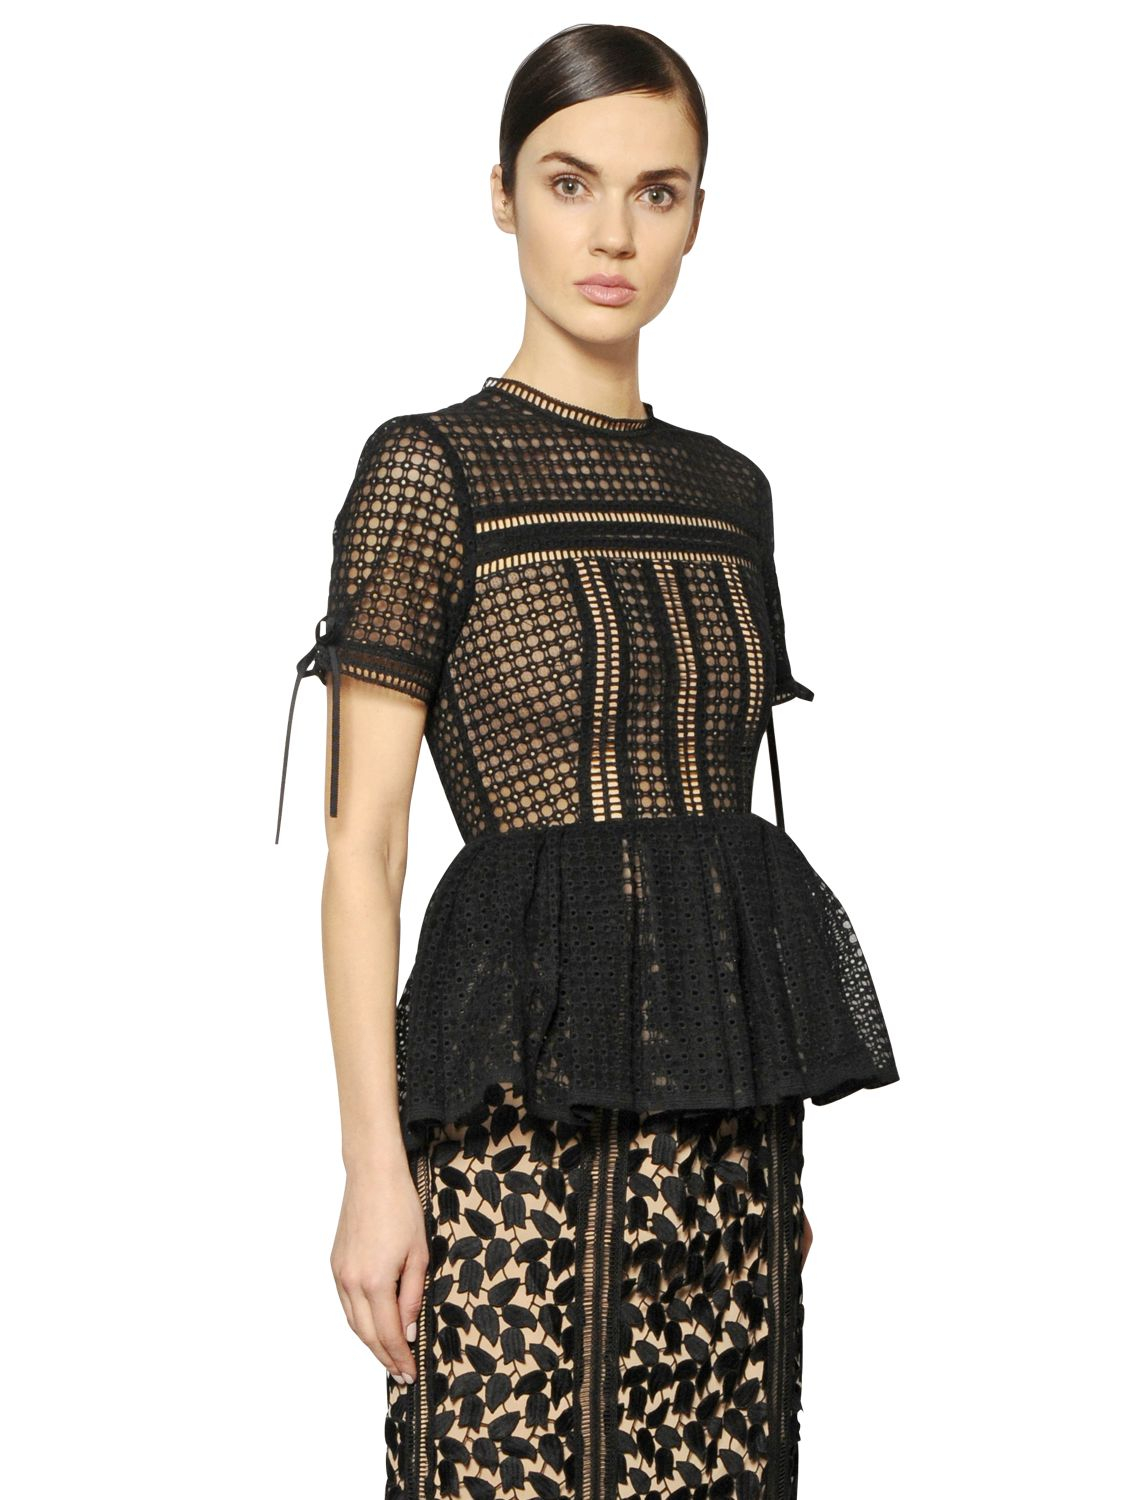 Lyst - Self-Portrait Lace Top With Peplum in Black